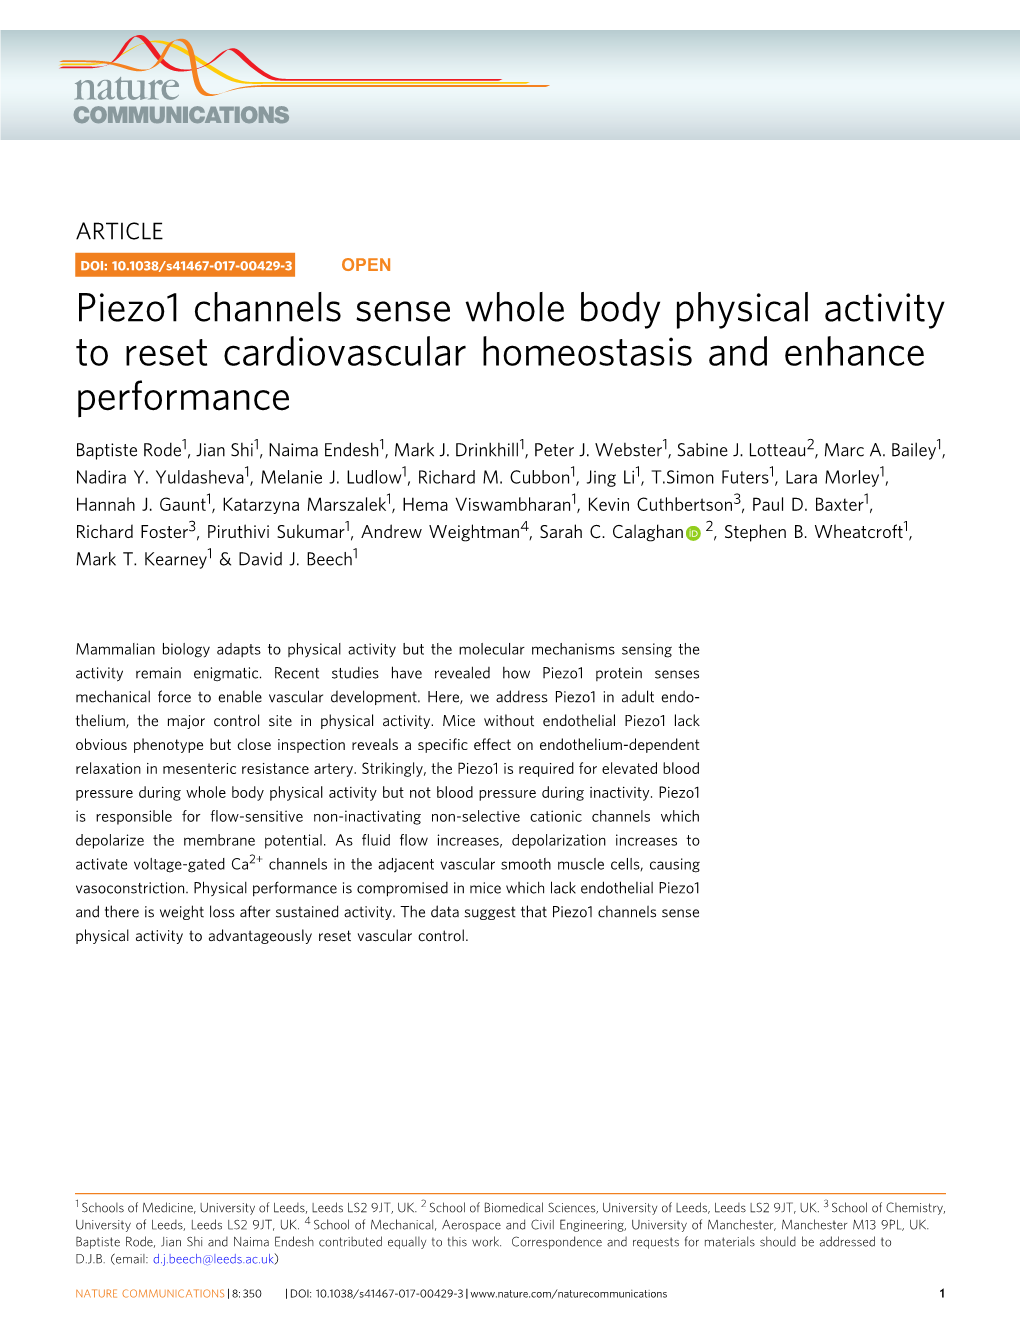 Piezo1 Channels Sense Whole Body Physical Activity to Reset Cardiovascular Homeostasis and Enhance Performance